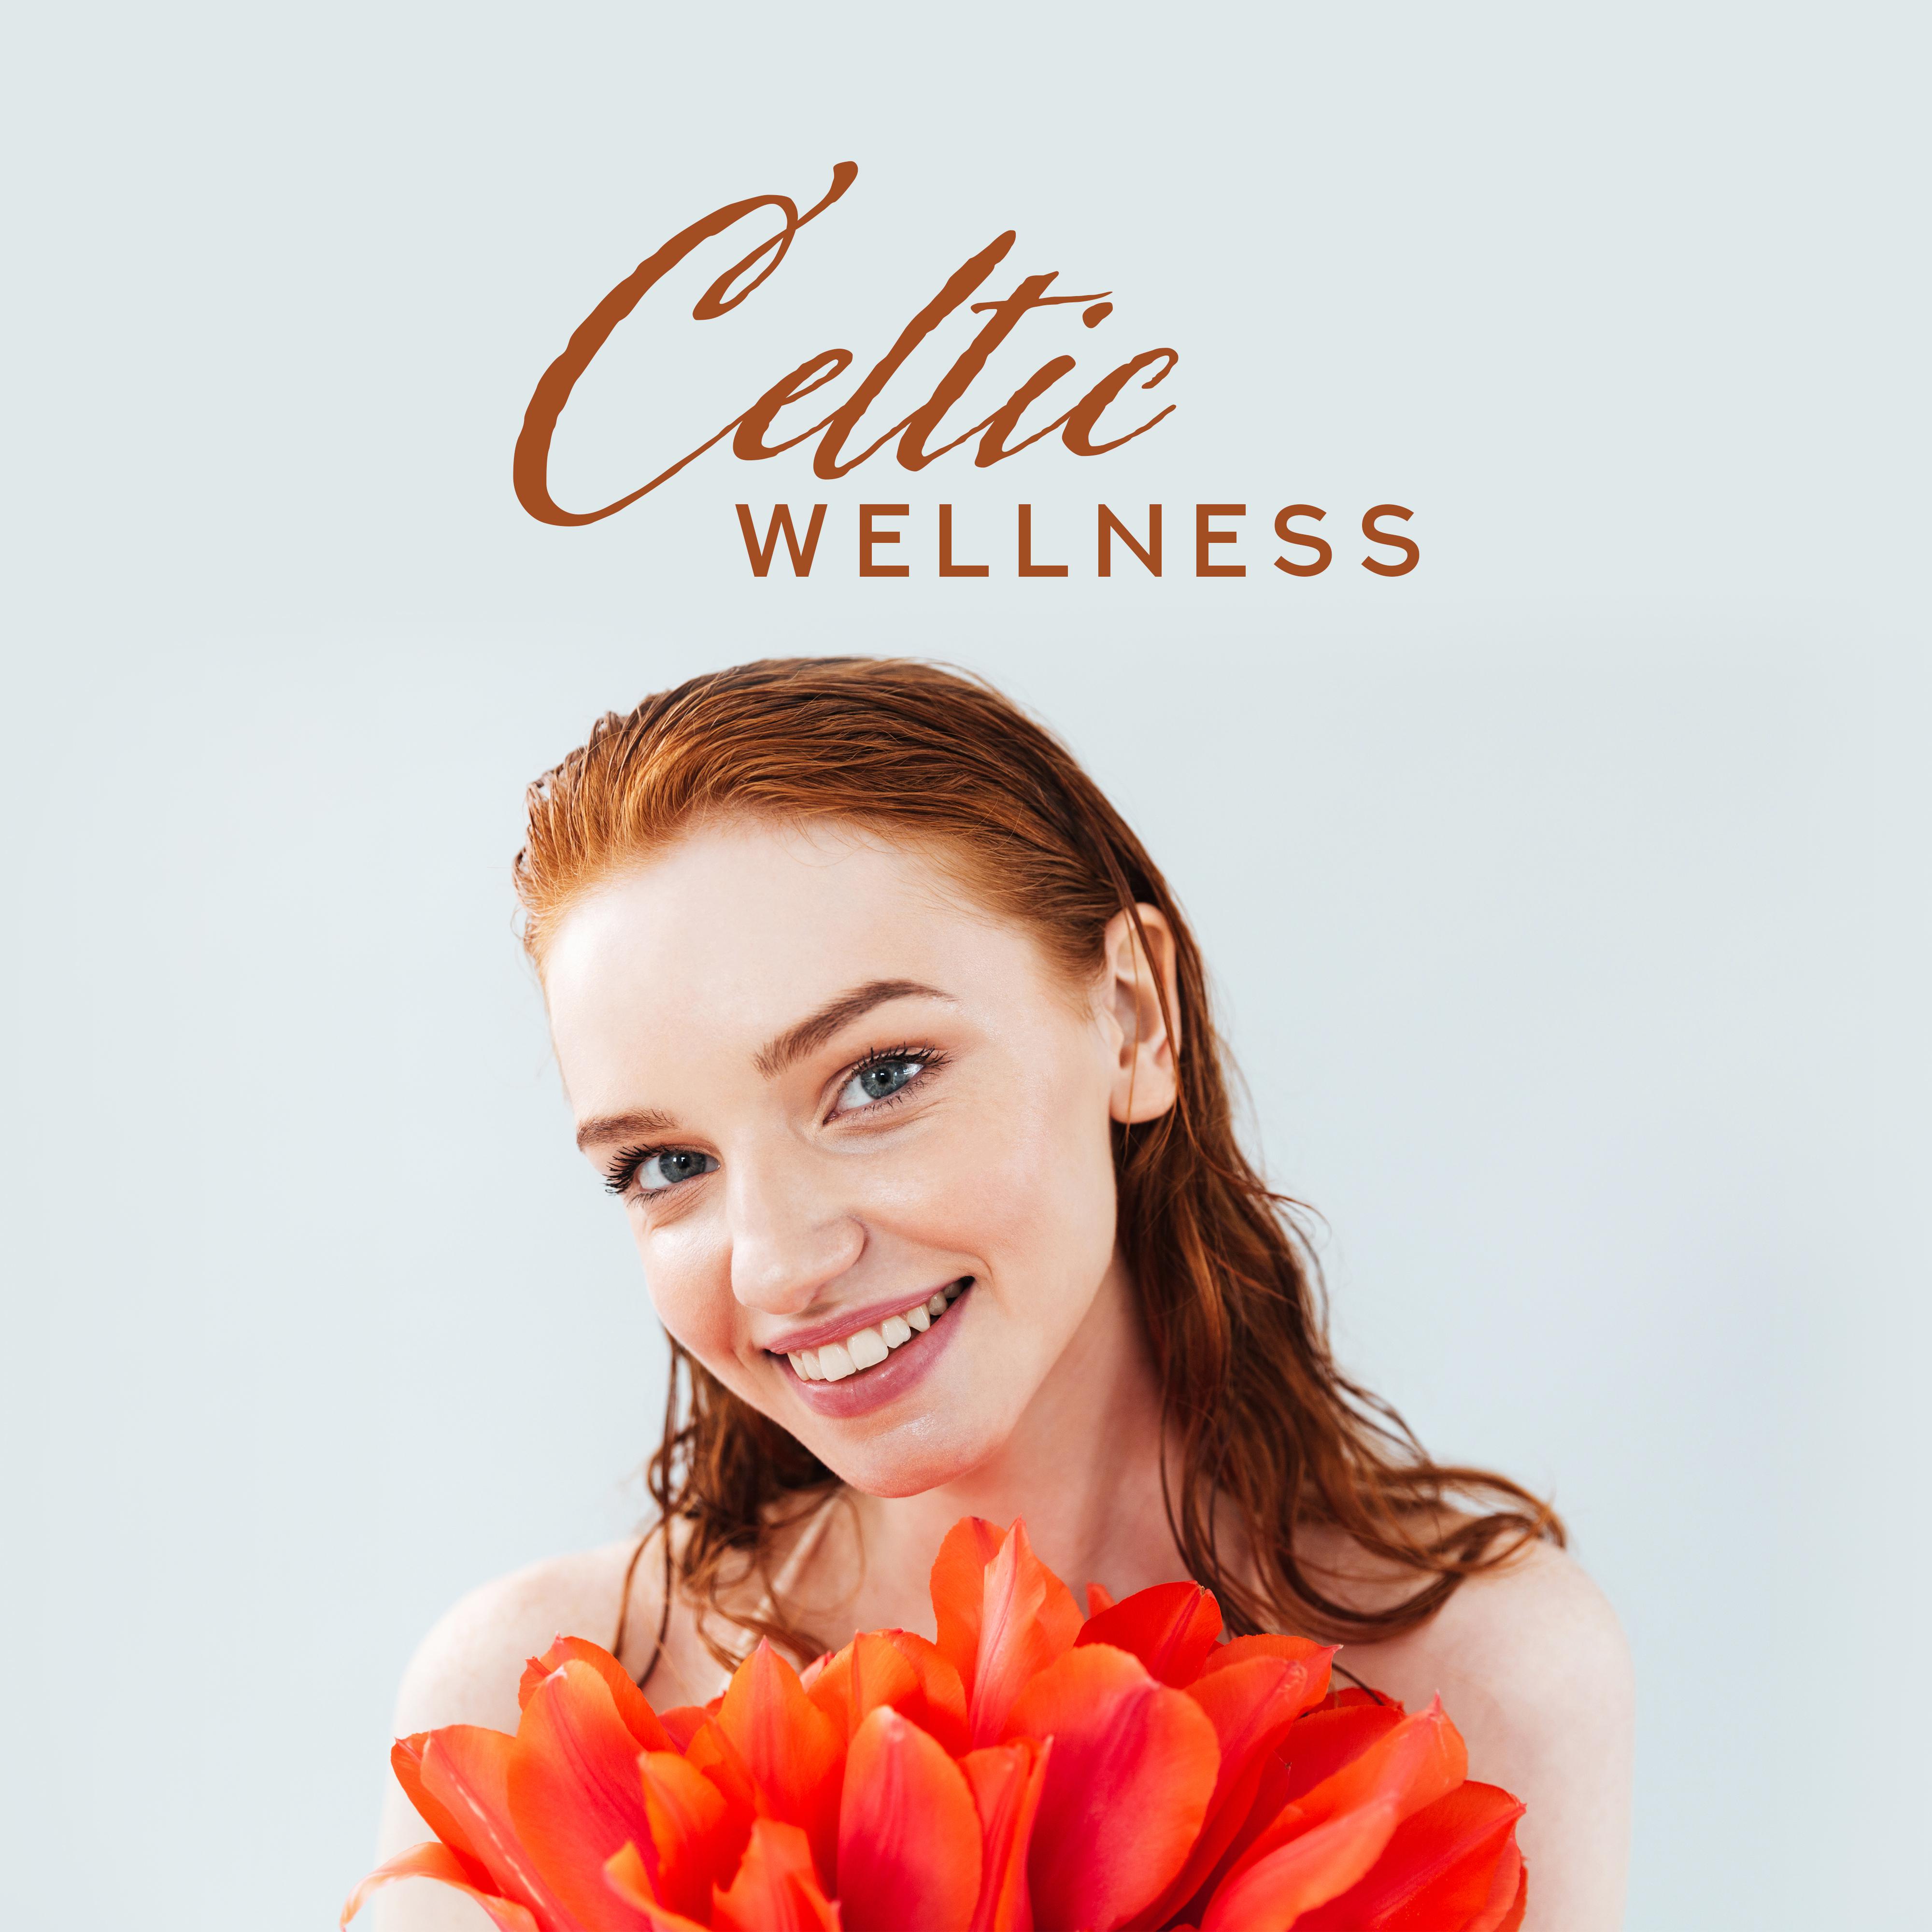 Celtic Wellness: Celtic wellness: Spa Music for Beauty and Relaxation Treatments, Massage, Bathing and Rest